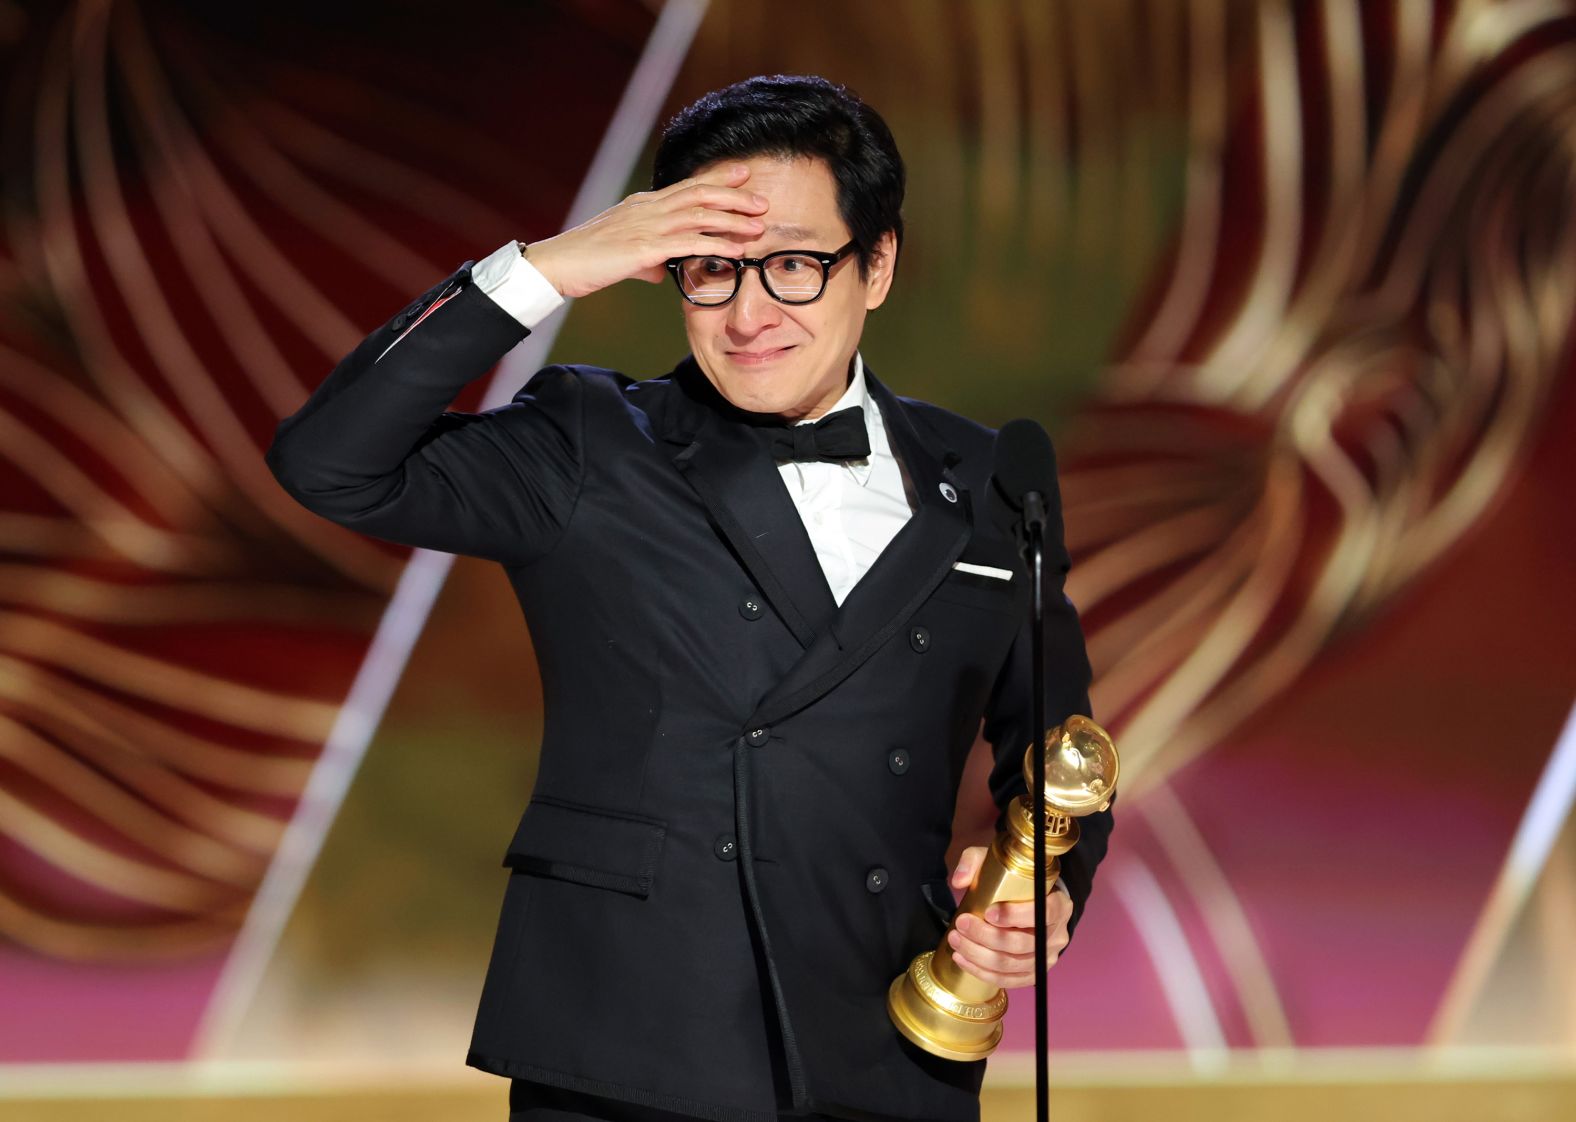 Ke Huy Quan accepts the Golden Globe for <a href="index.php?page=&url=https%3A%2F%2Fwww.cnn.com%2F2023%2F01%2F10%2Fentertainment%2Fke-huy-quan-golden-globes-win-cec%2Findex.html" target="_blank">best supporting actor in a motion picture</a> on Tuesday, January 10. Quan, who starred in the film "Everything Everywhere All at Once," harkened back to his days as an '80s child actor in his speech. <a href="index.php?page=&url=http%3A%2F%2Fwww.cnn.com%2F2023%2F01%2F10%2Fentertainment%2Fgallery%2F2023-golden-globe-winners%2Findex.html" target="_blank">See all the Golden Globe winners</a>.